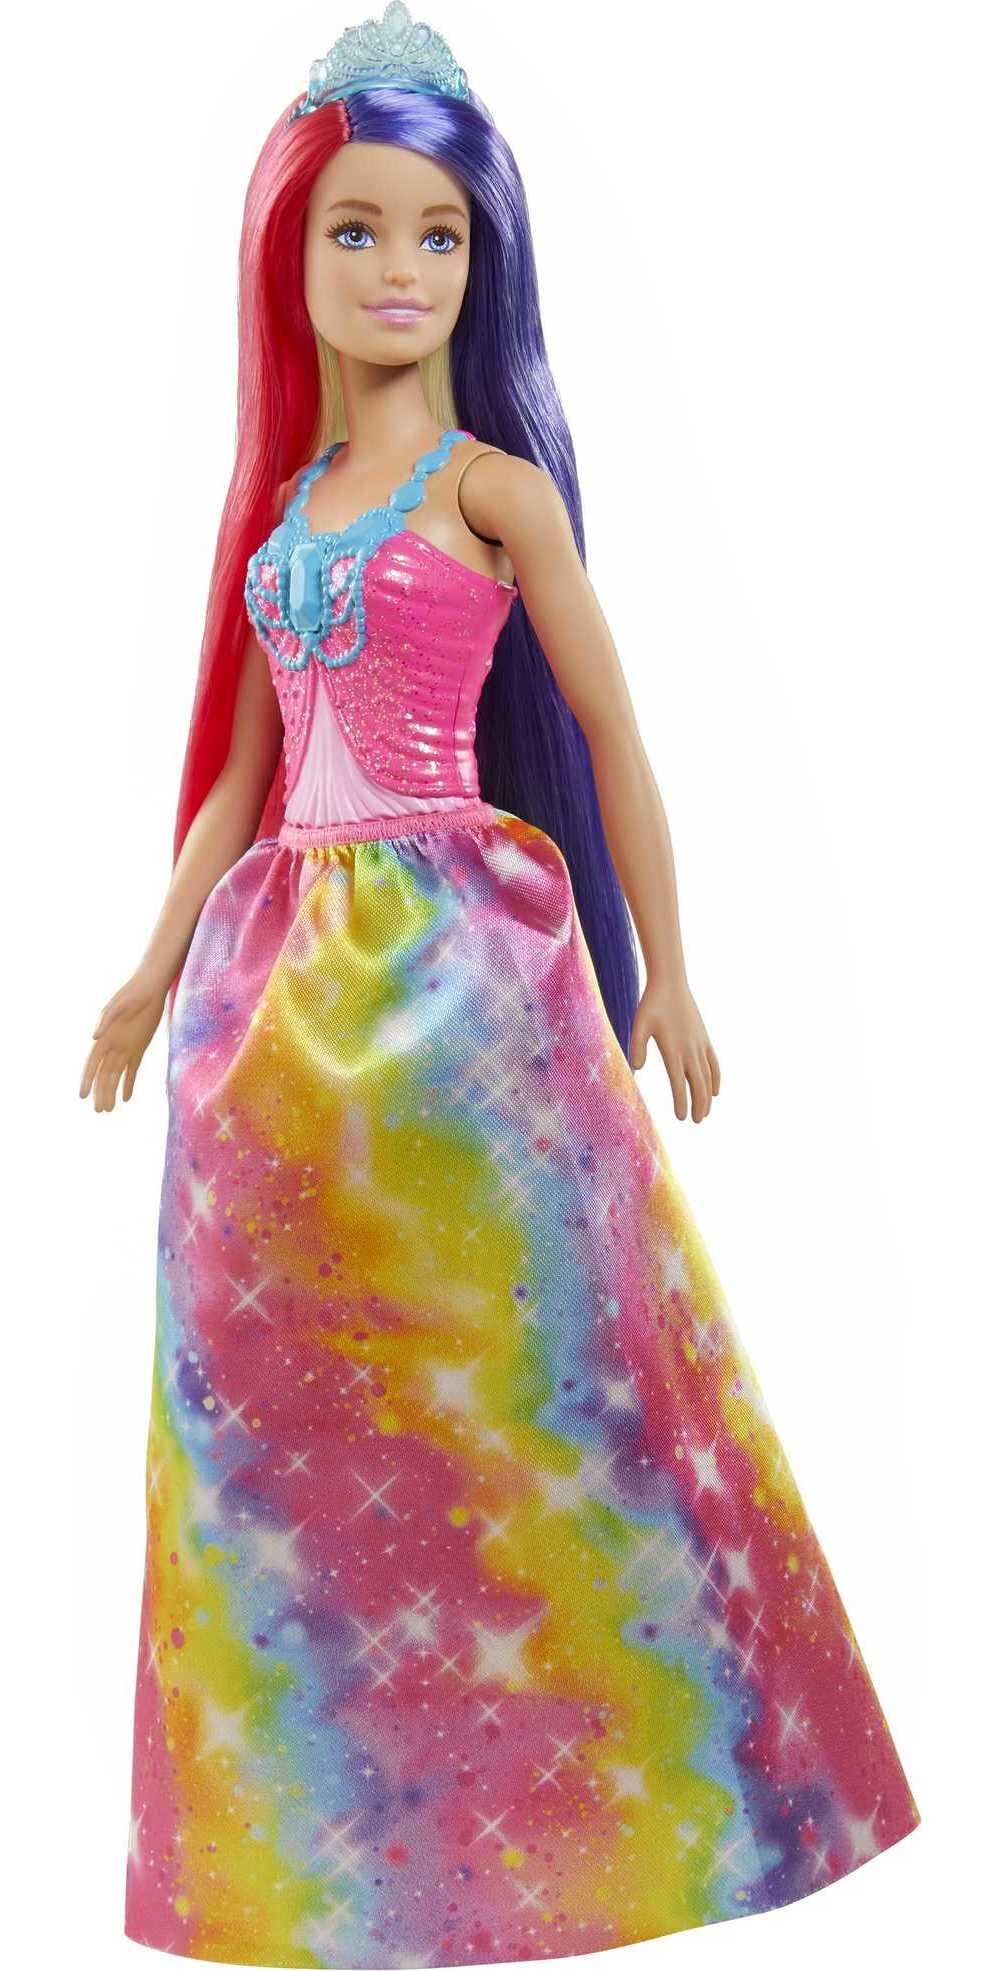 auditorium Leeuw Banzai Barbie Dreamtopia Royal Doll in Rainbow Dress with Long Colorful Hair and  Accessories - Walmart.com